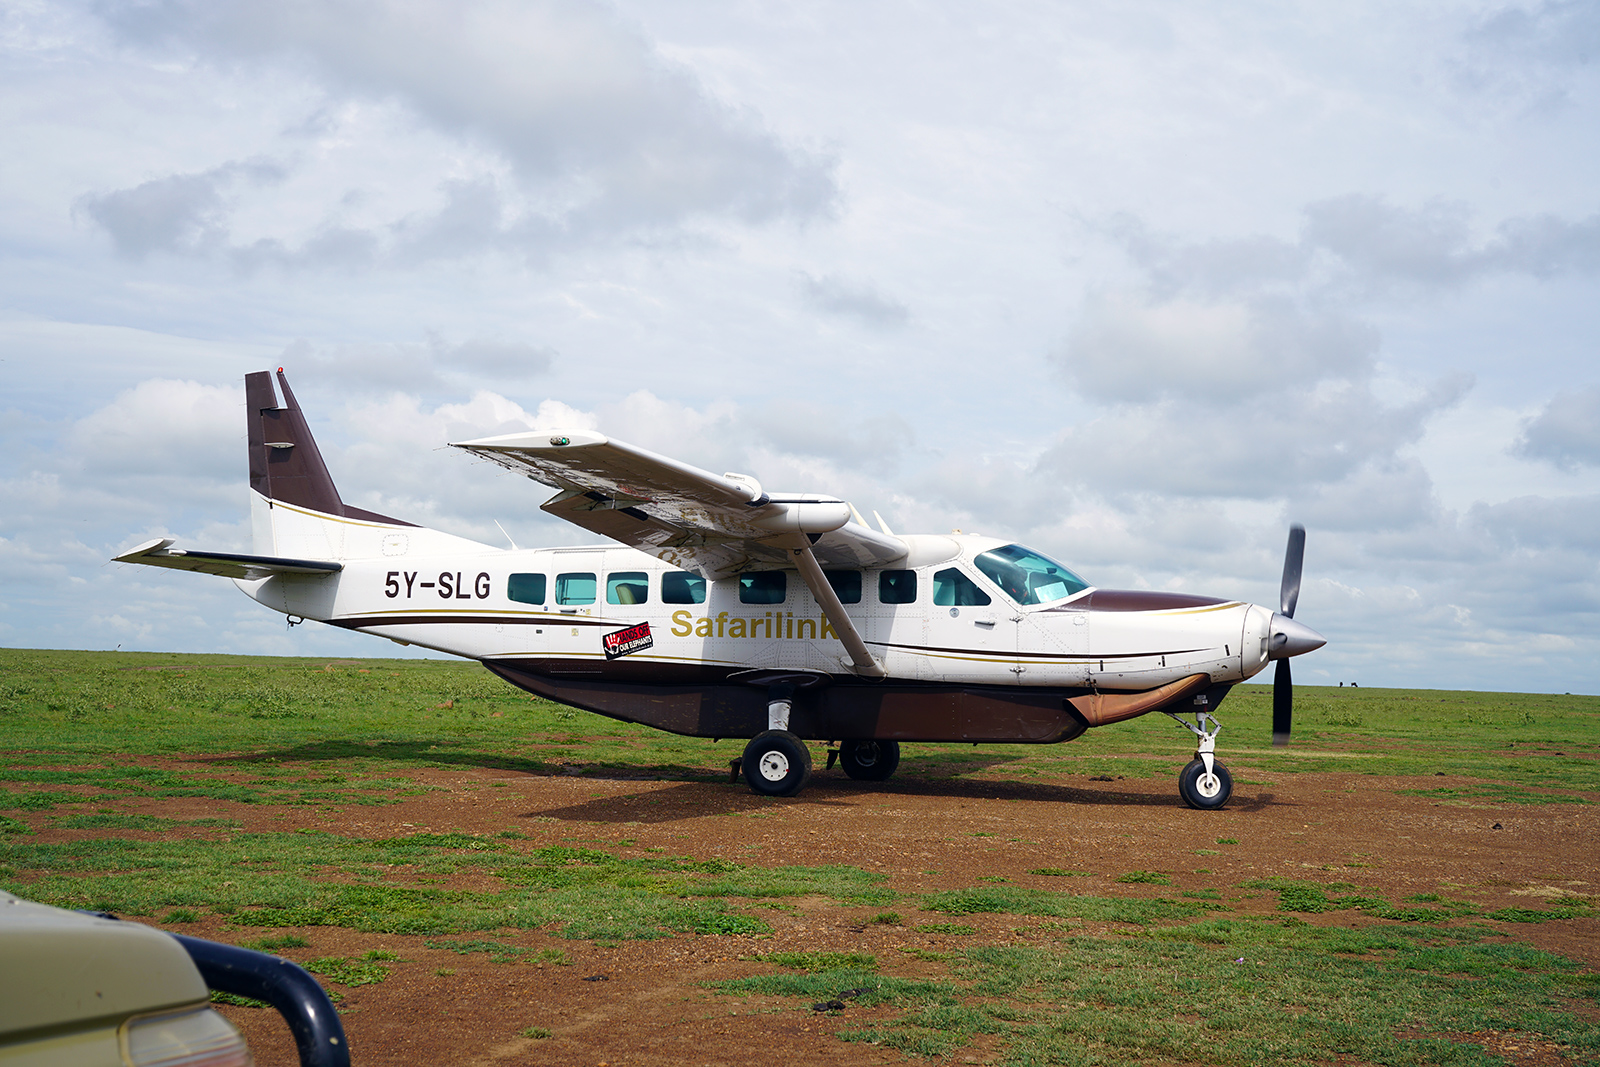 Our tiny plane landed on this ridiculous airstrip surrounded by zebras and other wildlife